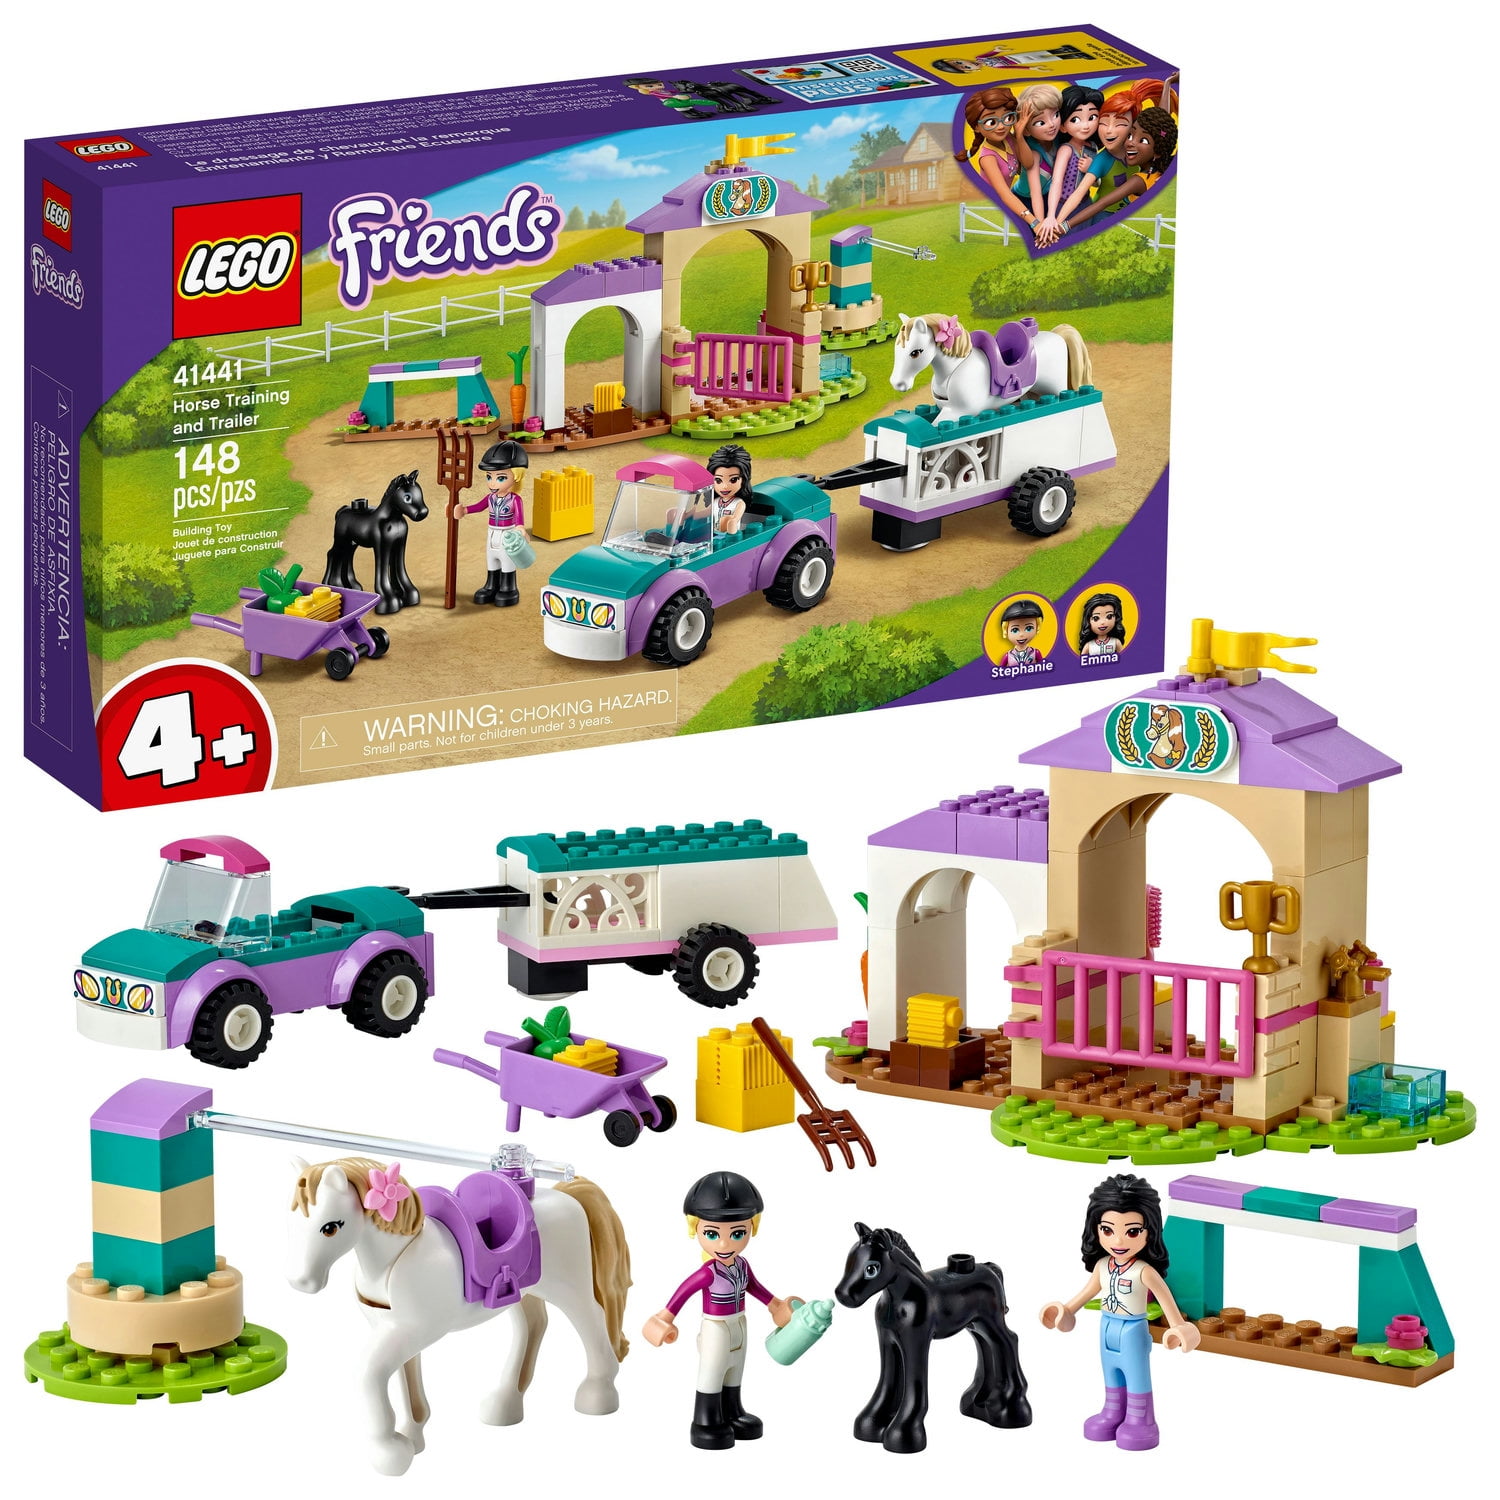 Menda City ihærdige Flytte LEGO Friends Horse Training and Trailer 41441 Building Toy; With LEGO  Friends Stephanie and Emma (148 Pieces) - Walmart.com